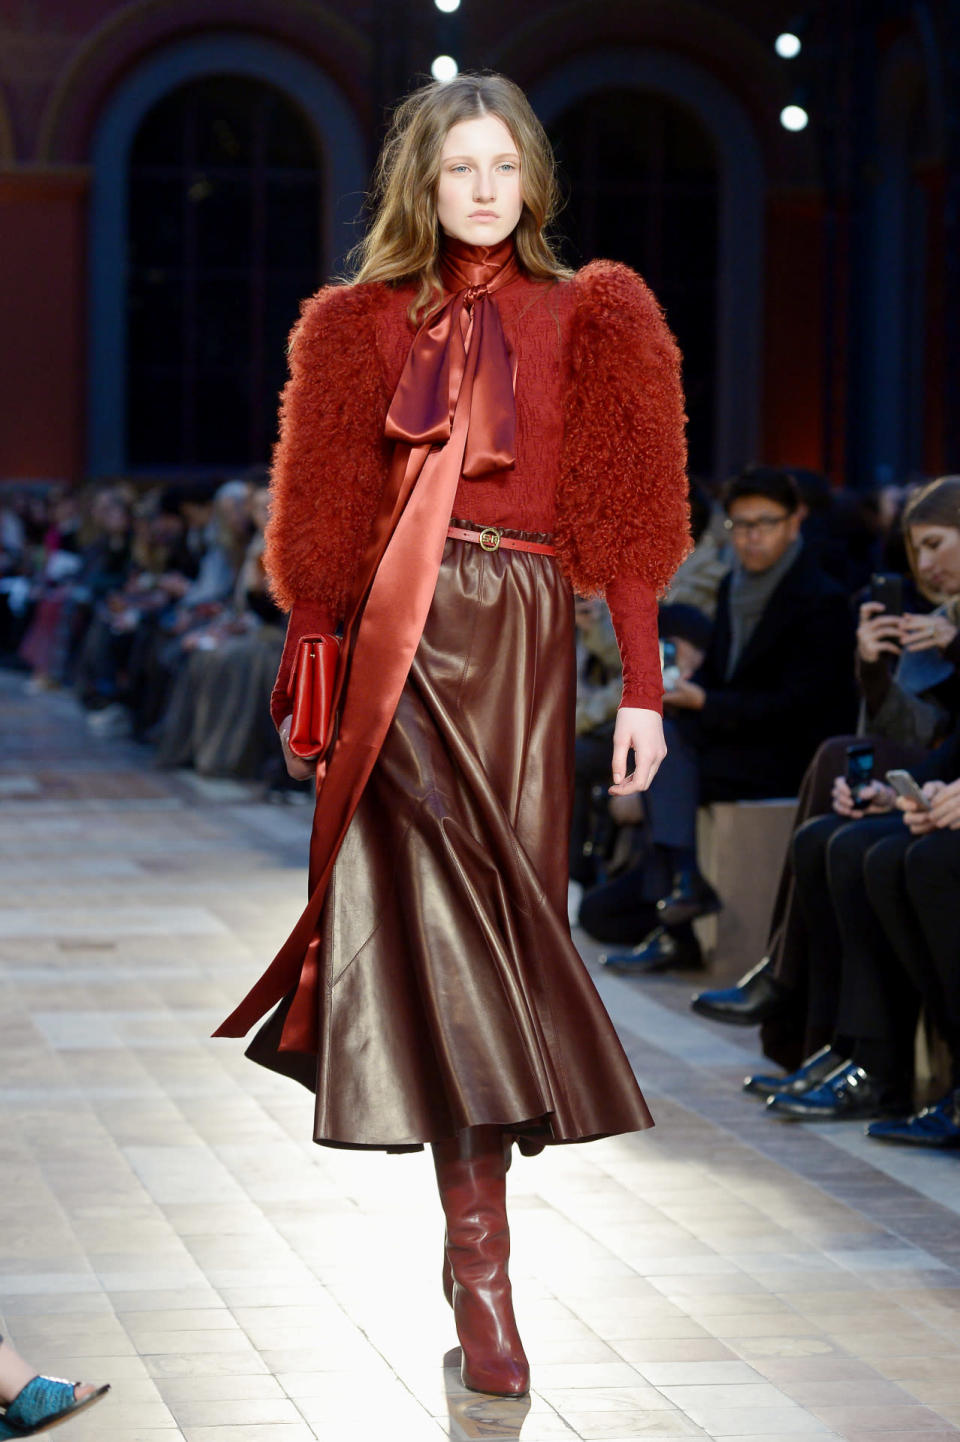 A model shows off a fur-sleeve sweater and leather skirt during the fall 2016 Sonia Rykiel show in Paris.